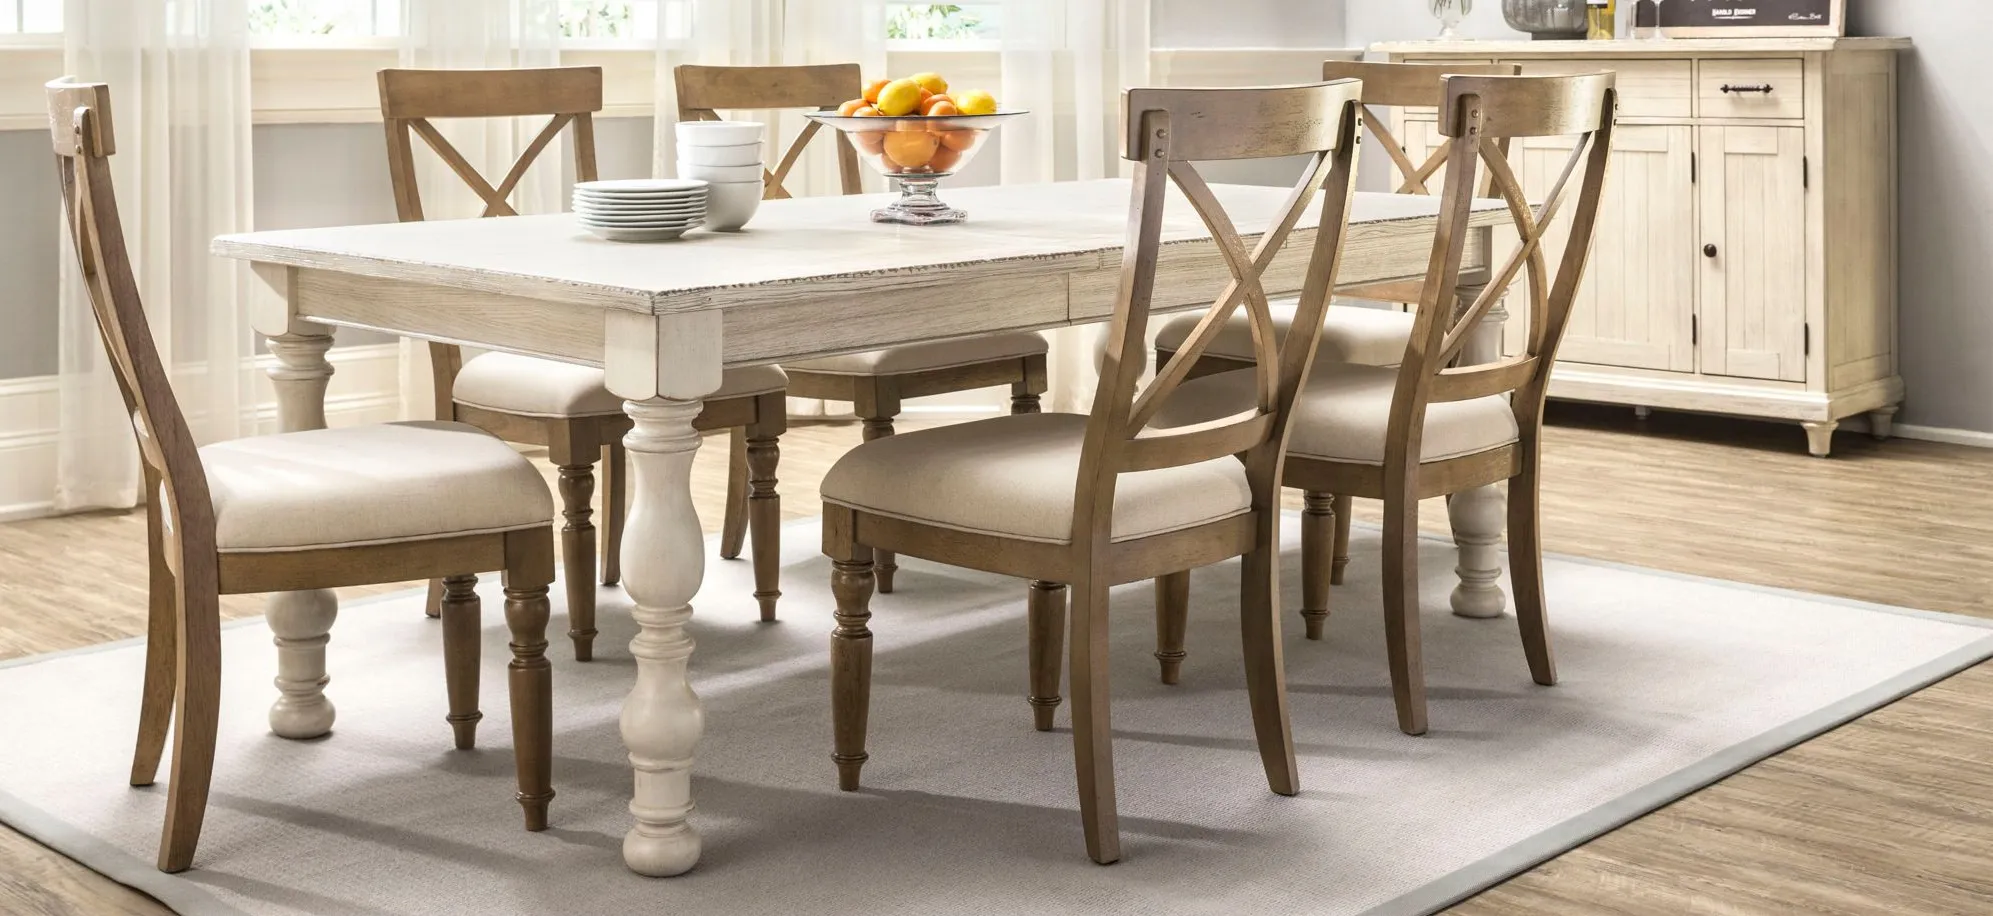 Aberdeen 7-pc. Dining Set in Beige / Weathered White / Weathered Drif by Riverside Furniture